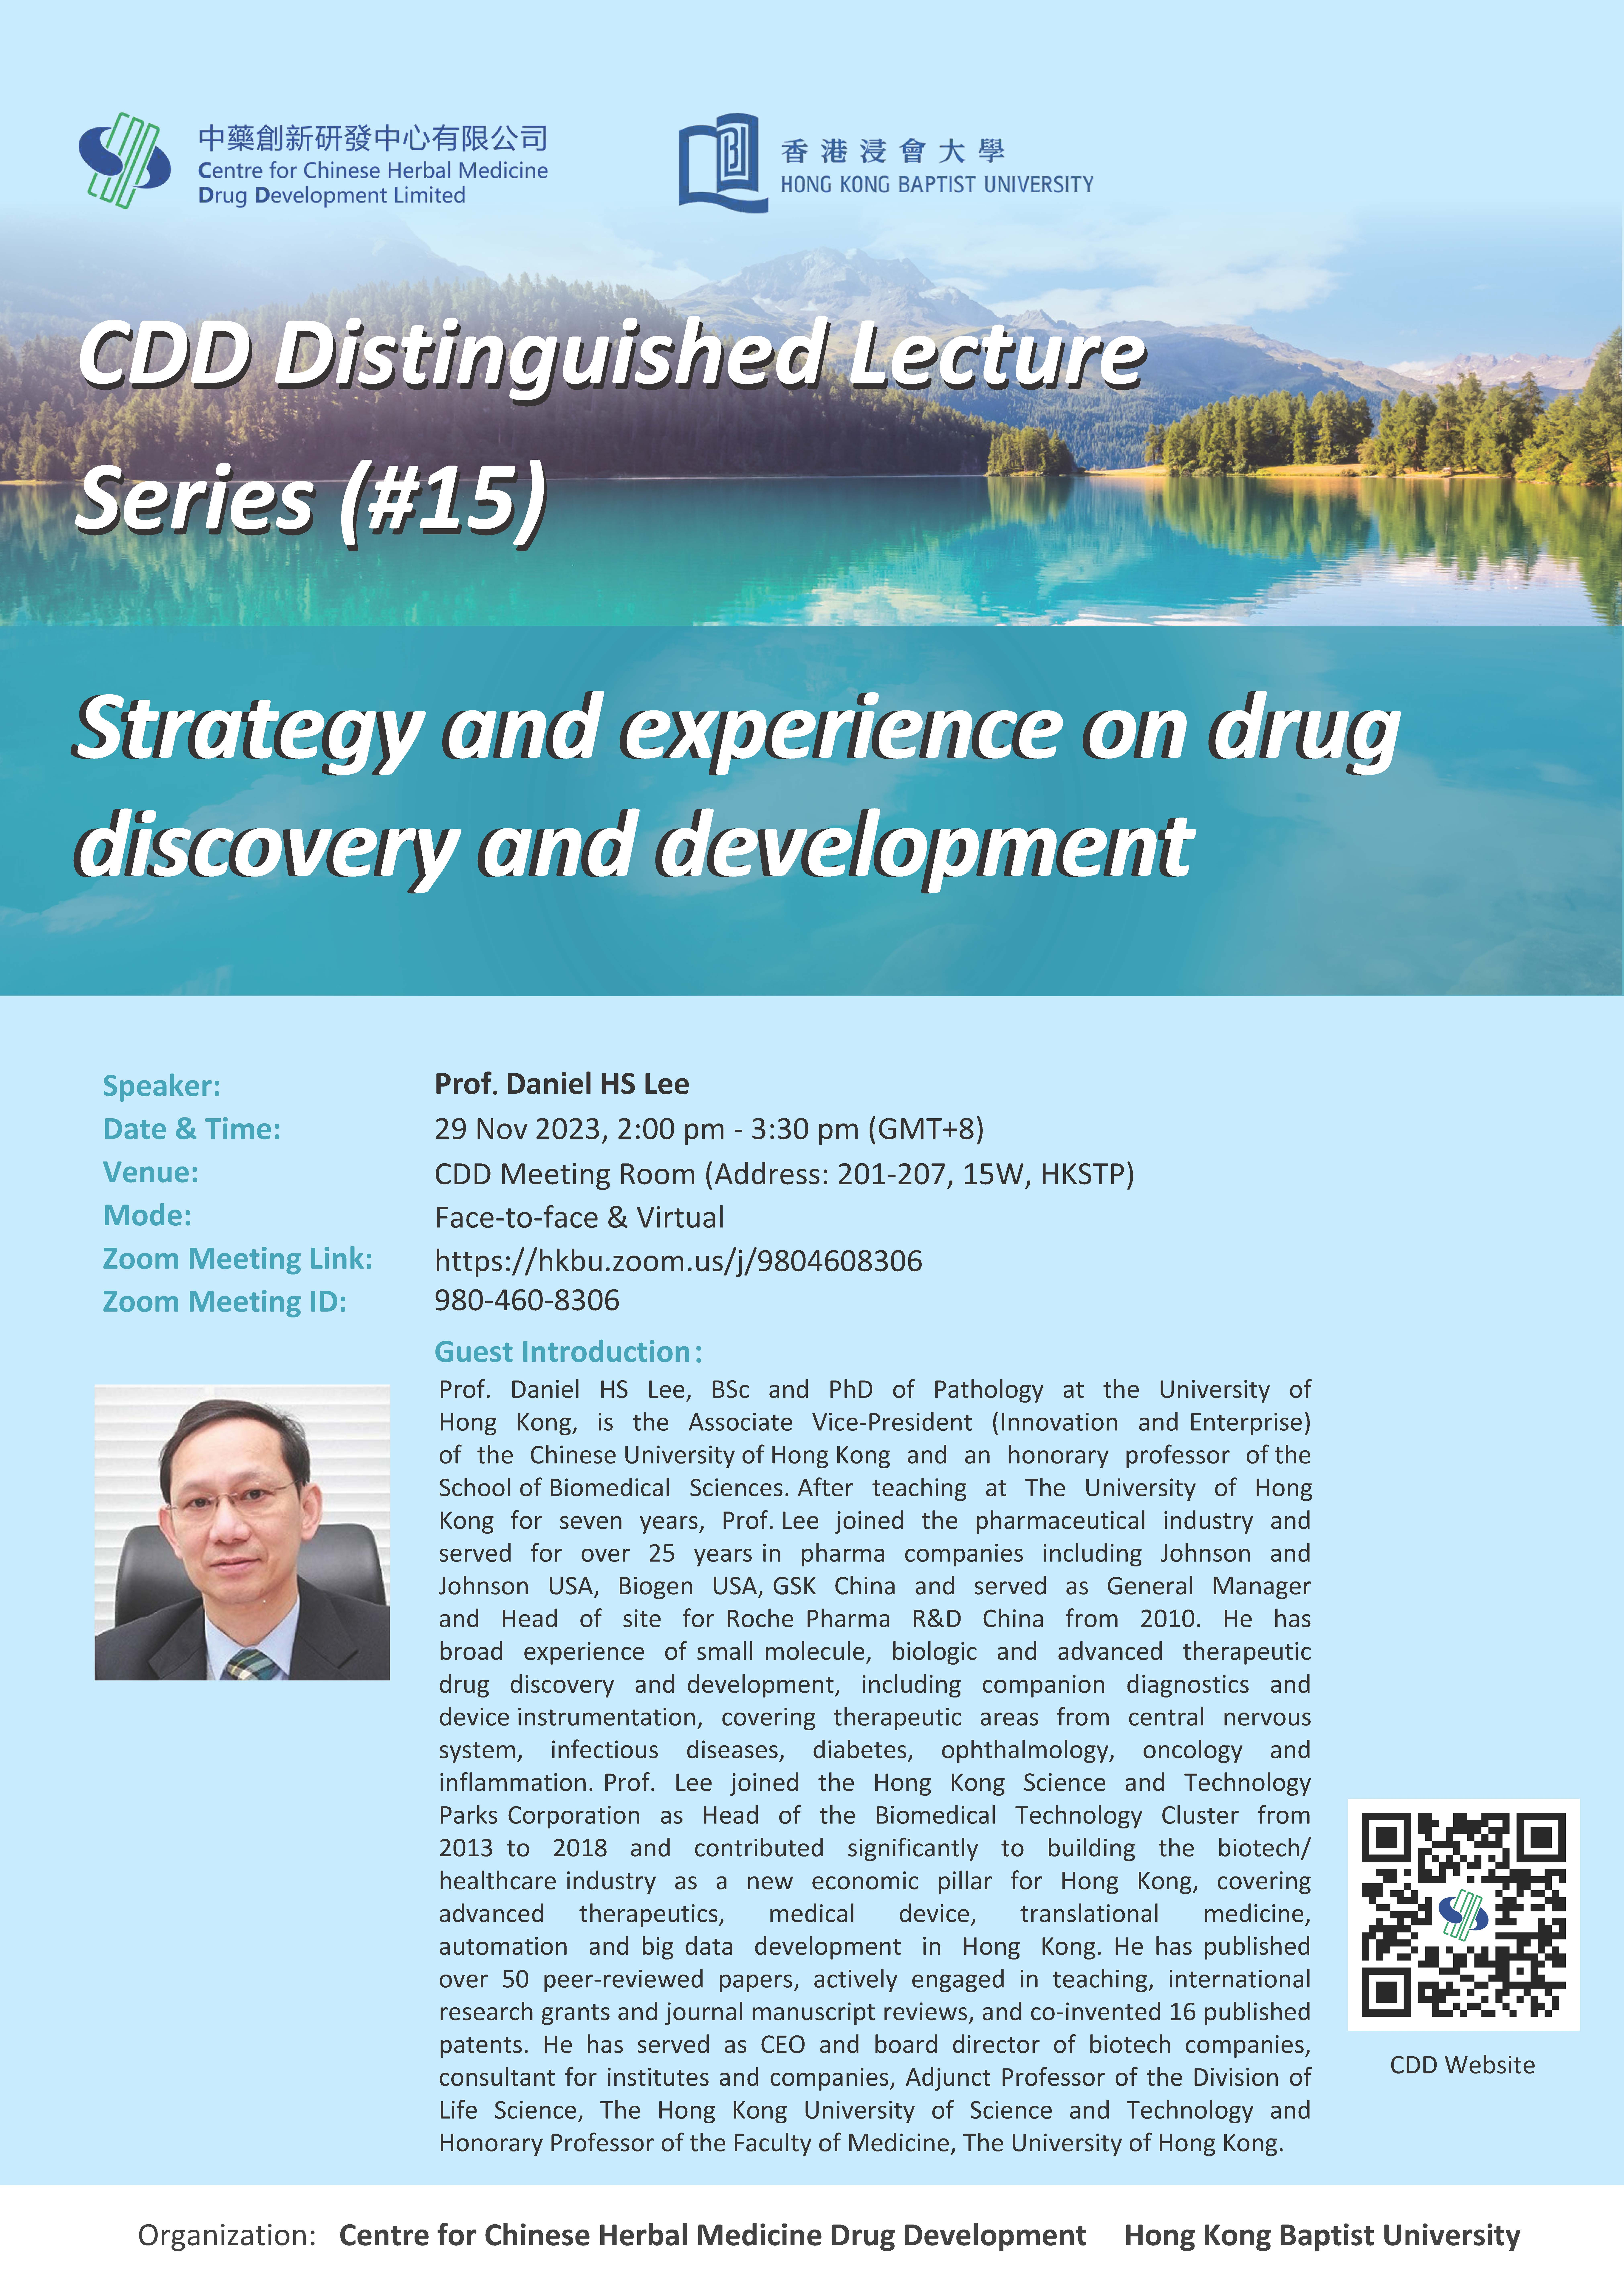 CDD Distinguished Lecture Series 15(By Prof Daniel LEE)